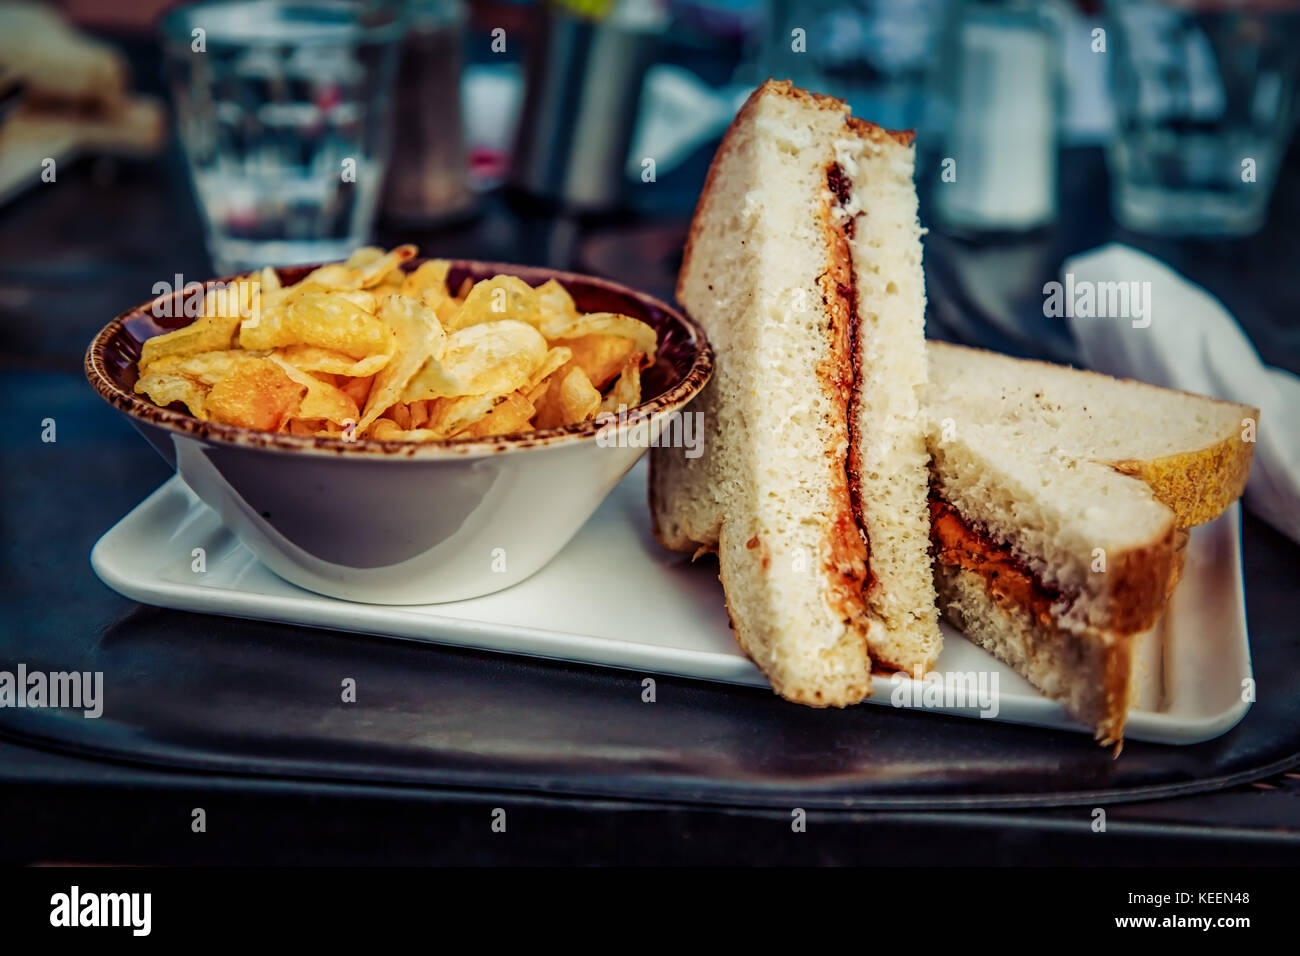 A Peanut Butter And Jelly Sandwich Made With Fresh White Bread And Stock Photo Alamy